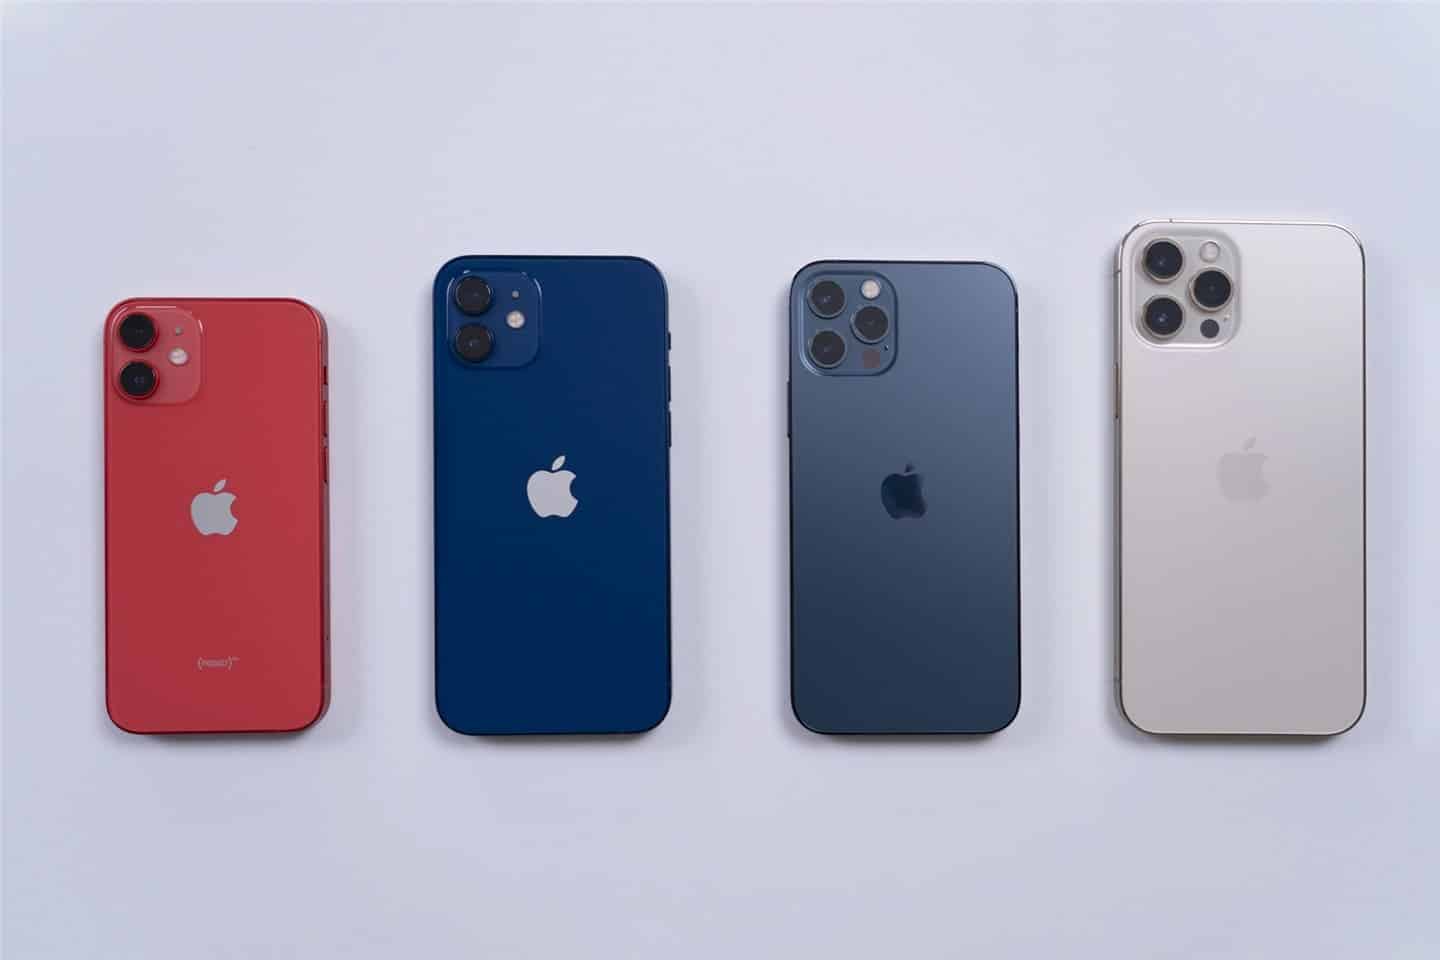 4 upcoming exciting Apple products in 2022